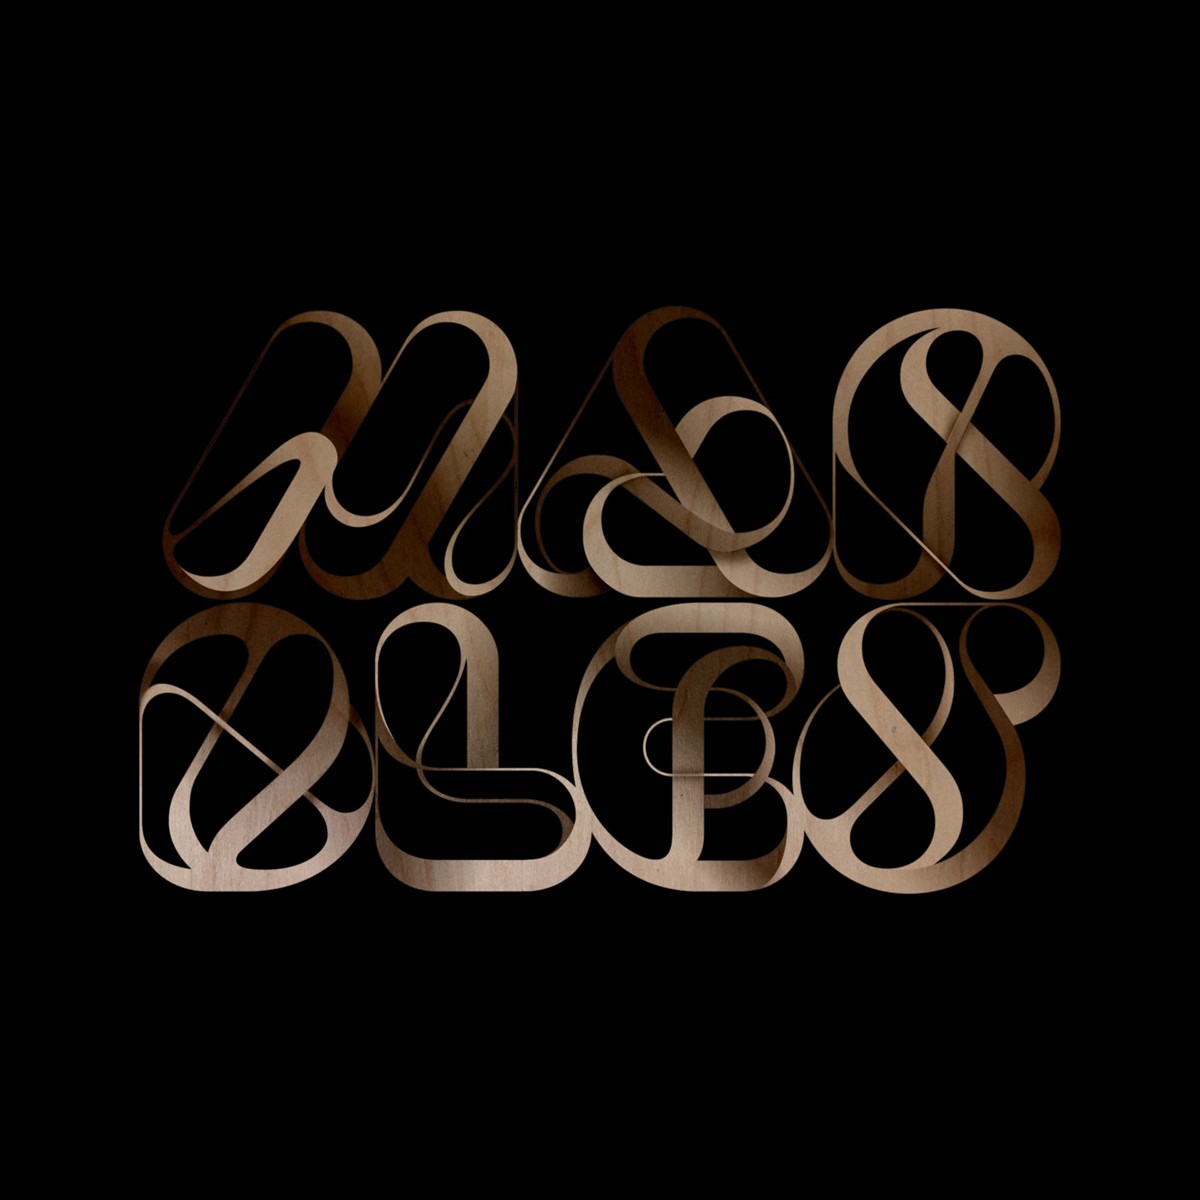 Marbles – An experimental typeface collaboration. Designed by Superfried. Built by F37. Manchester. Marbles logo wood render.